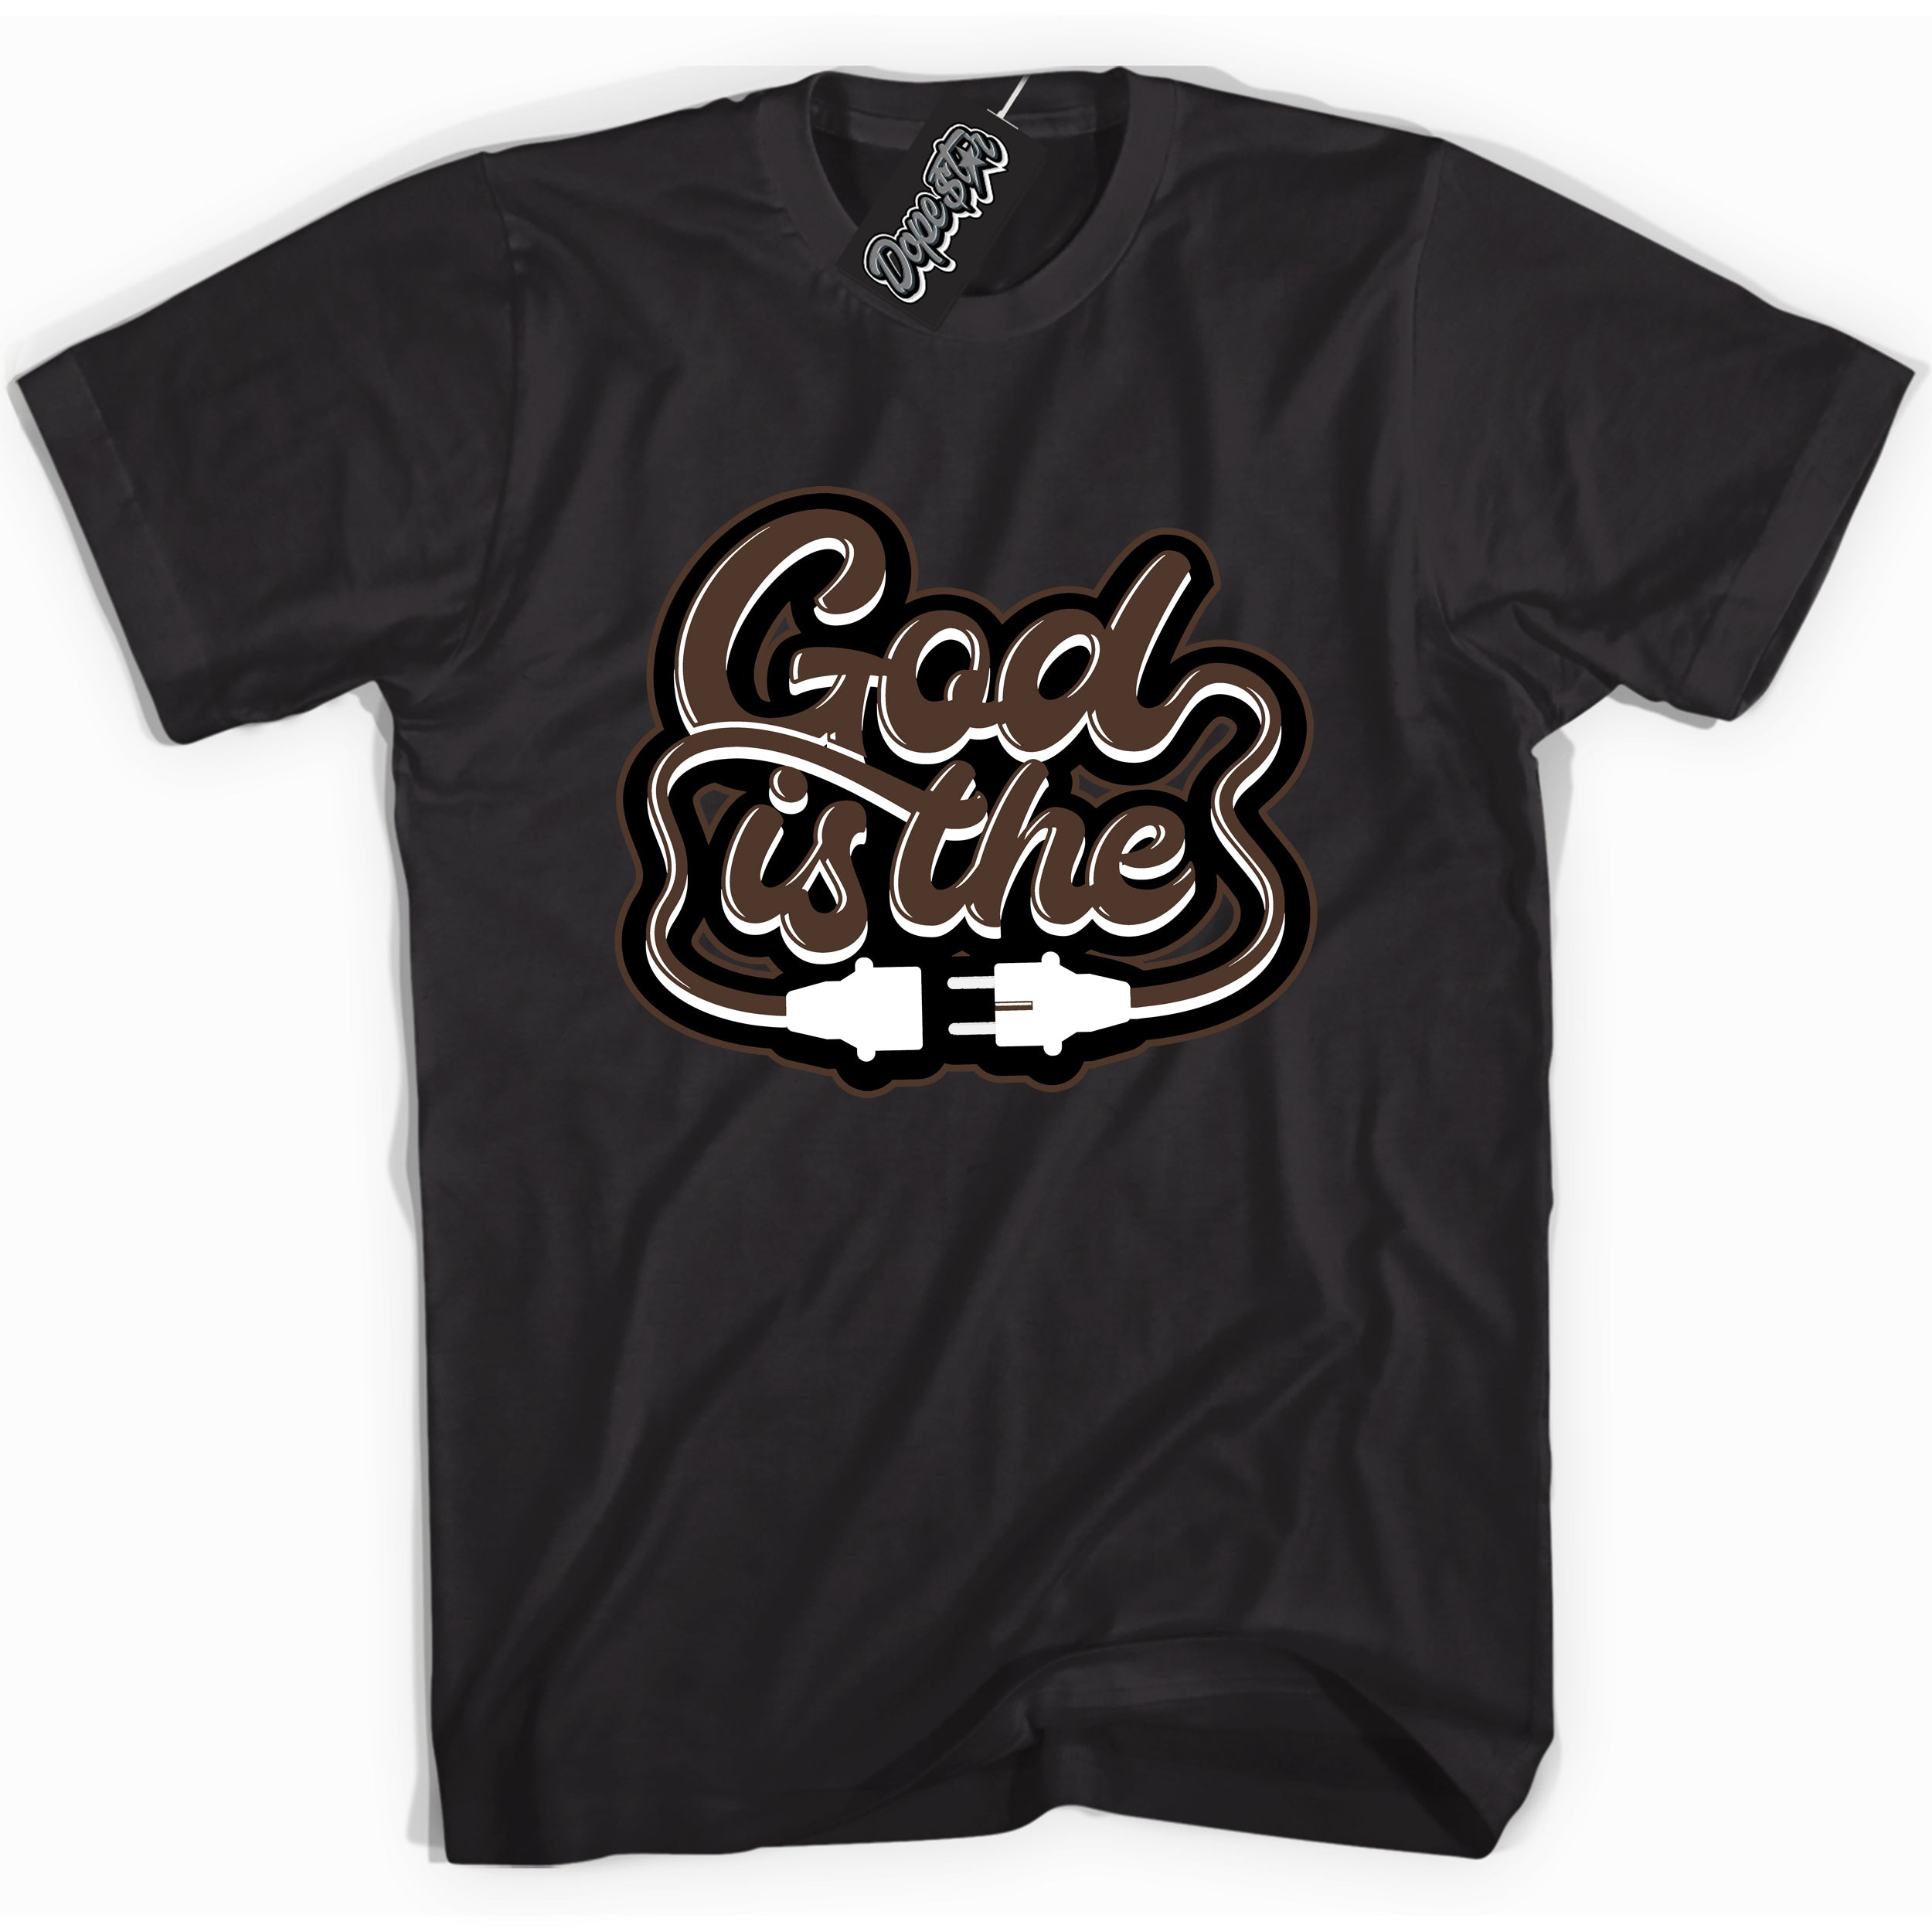 Cool Black graphic tee with “ God Is The ” design, that perfectly matches Palomino 1s sneakers 